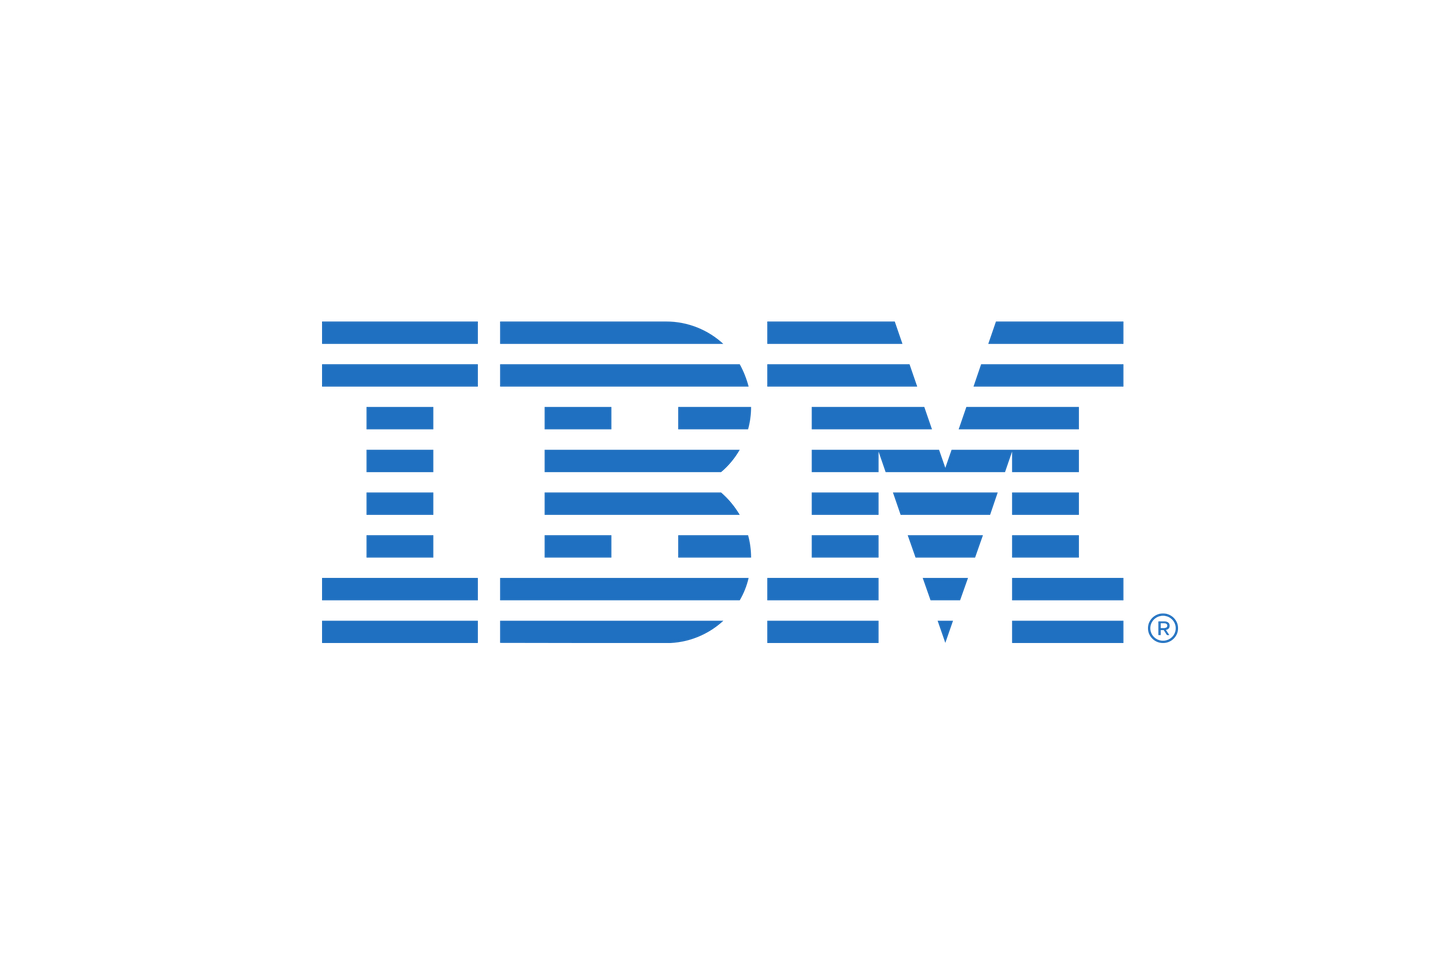 IBM Sterling B2B Services Collaboration Network Document per Month